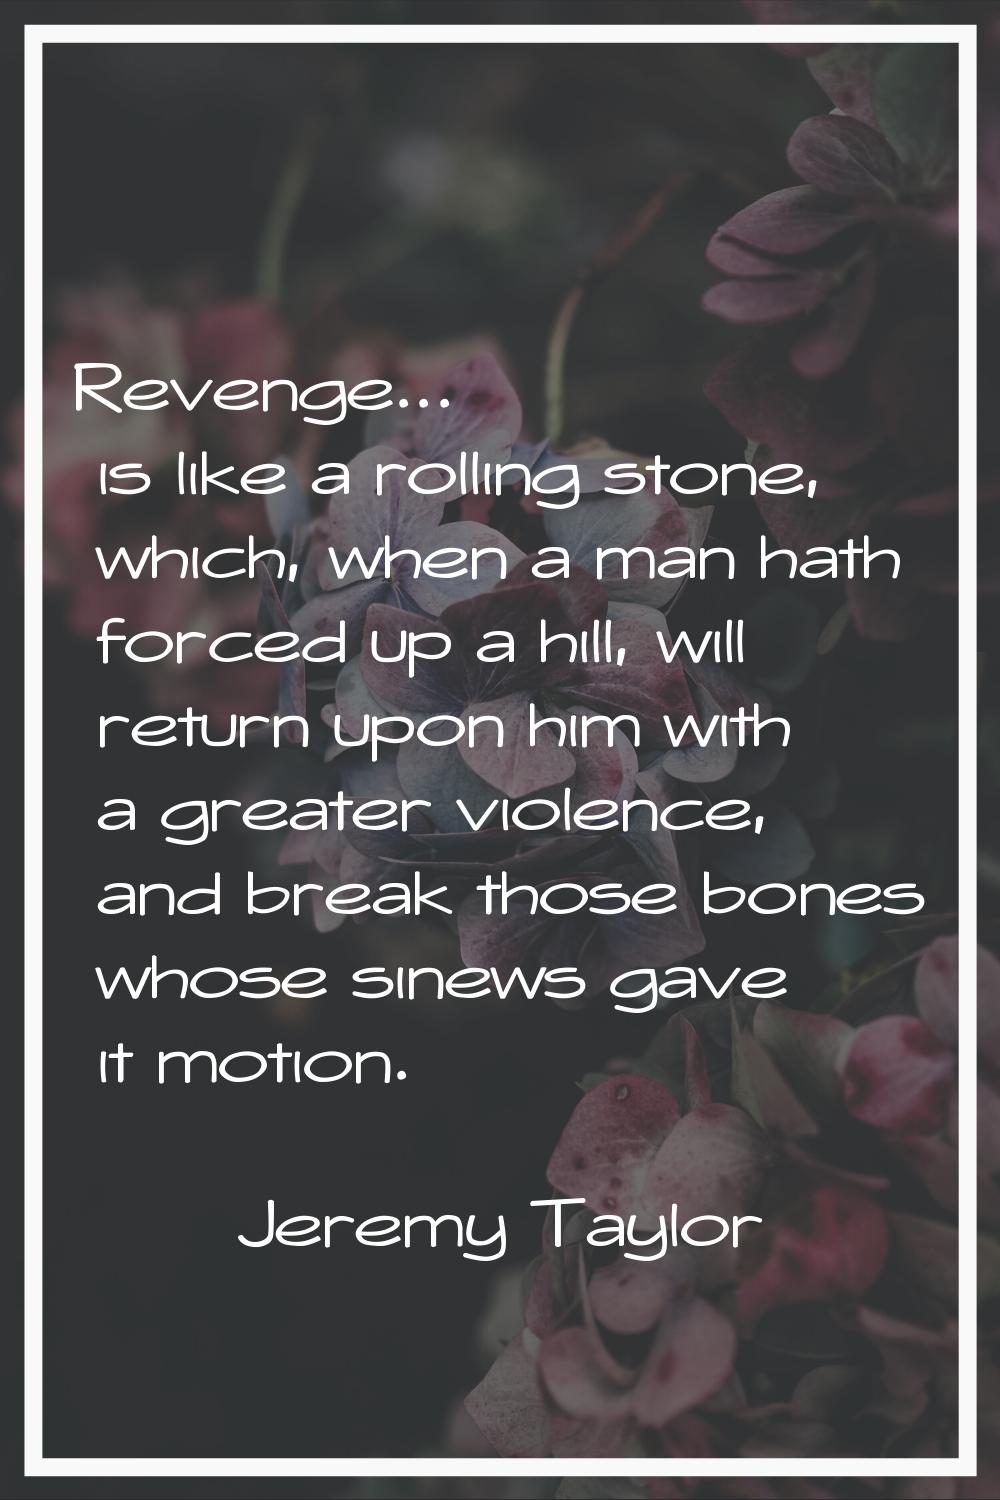 Revenge... is like a rolling stone, which, when a man hath forced up a hill, will return upon him w